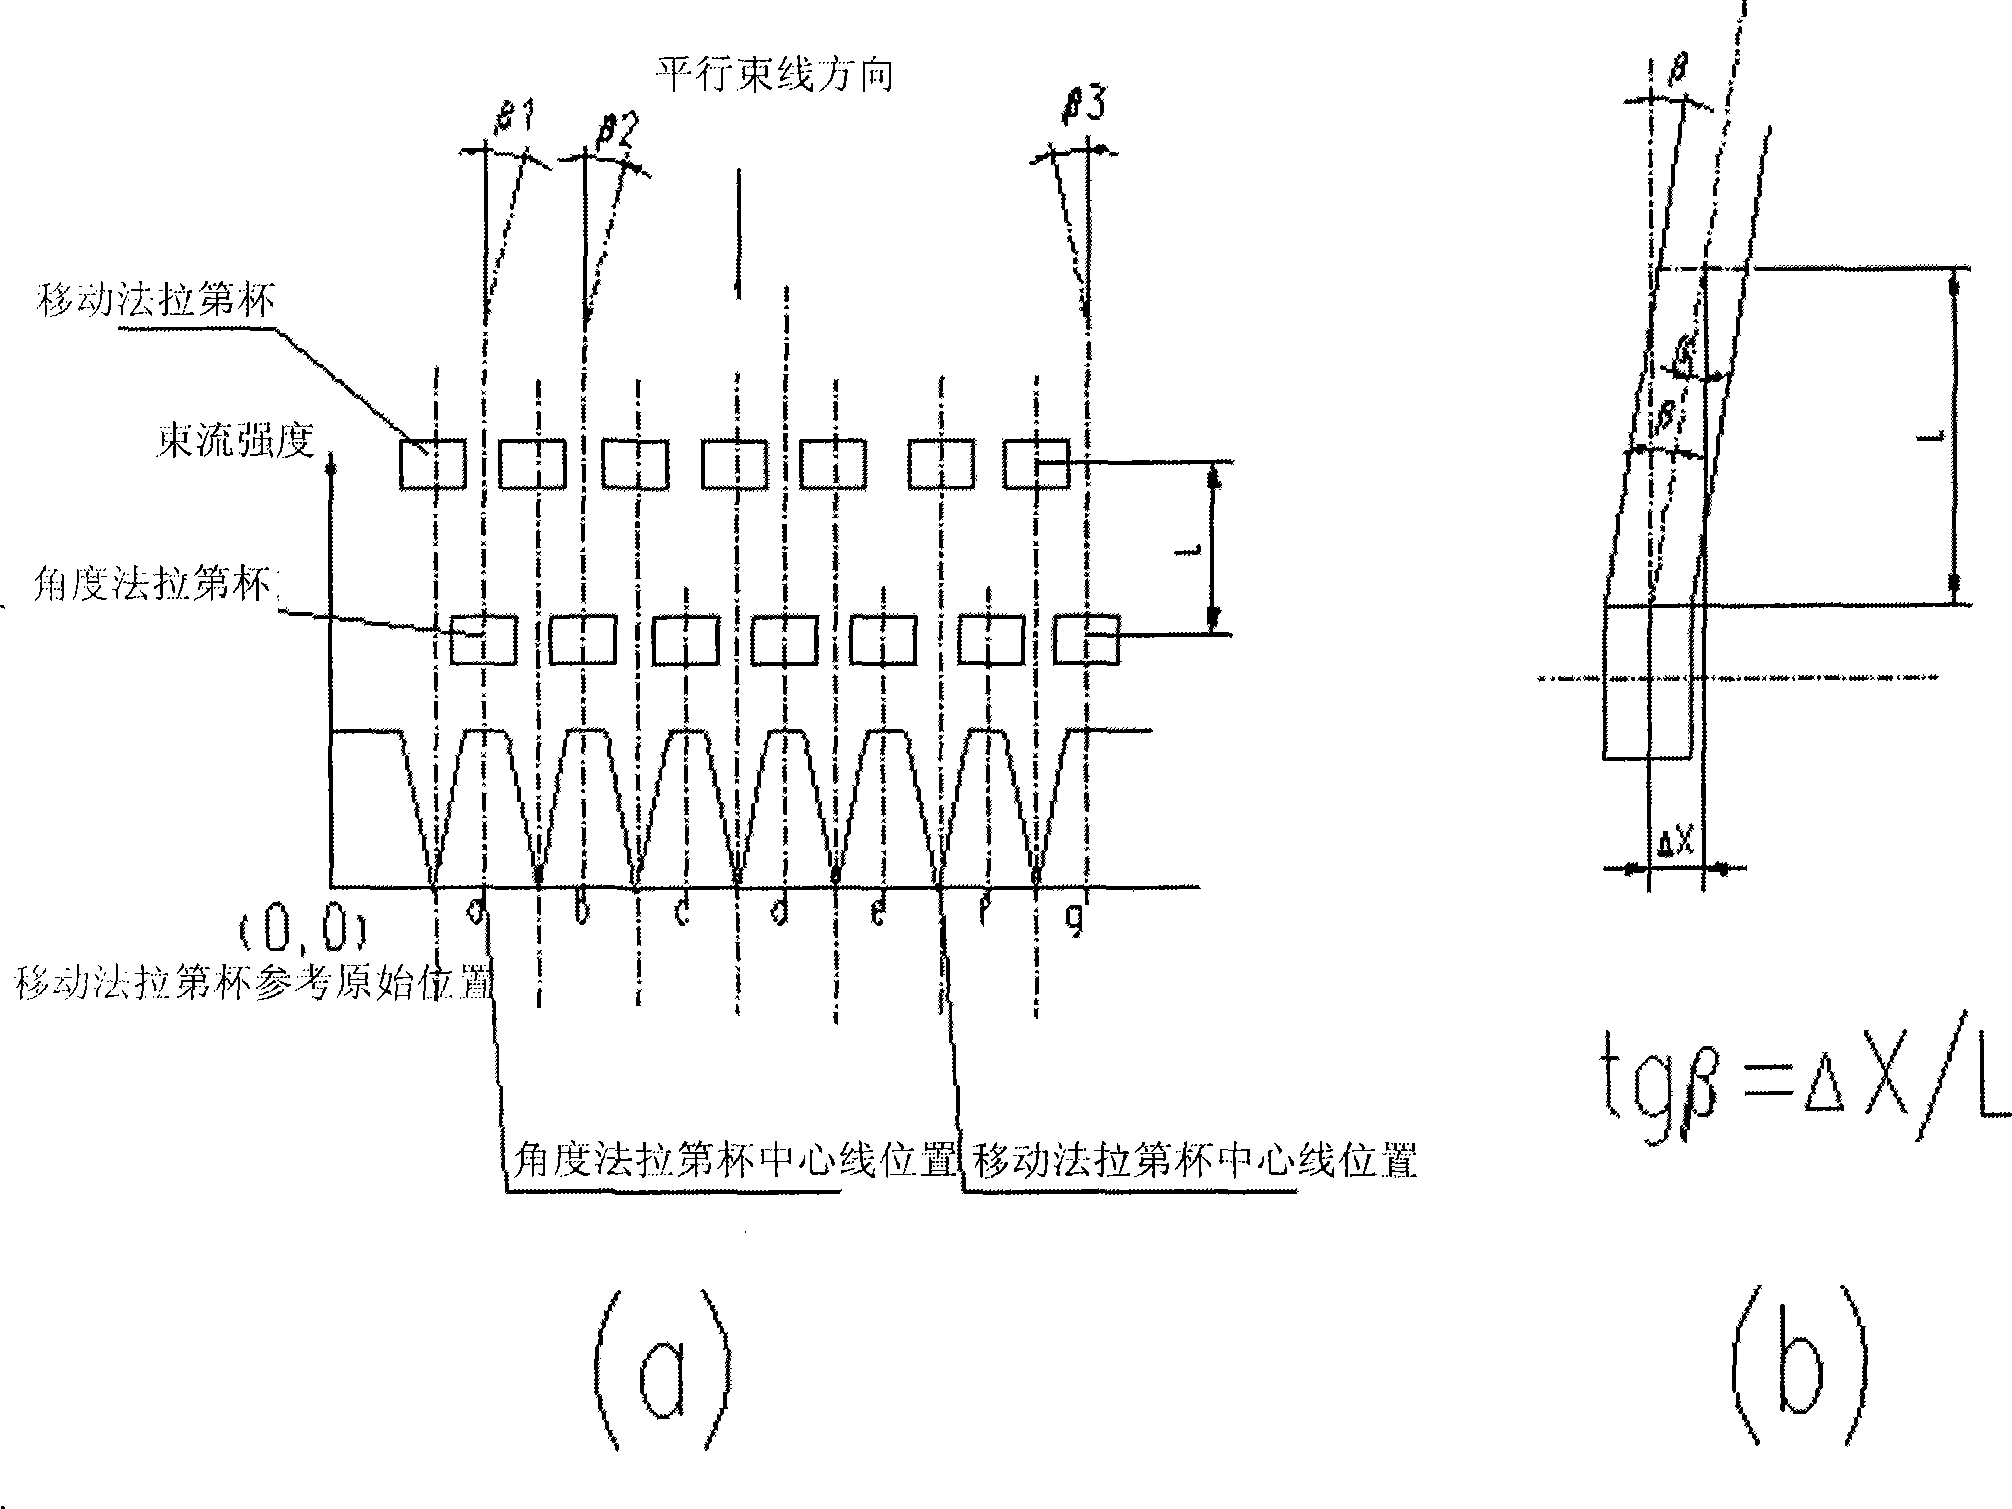 Faraday apparatus for angle measurement of parallel beam